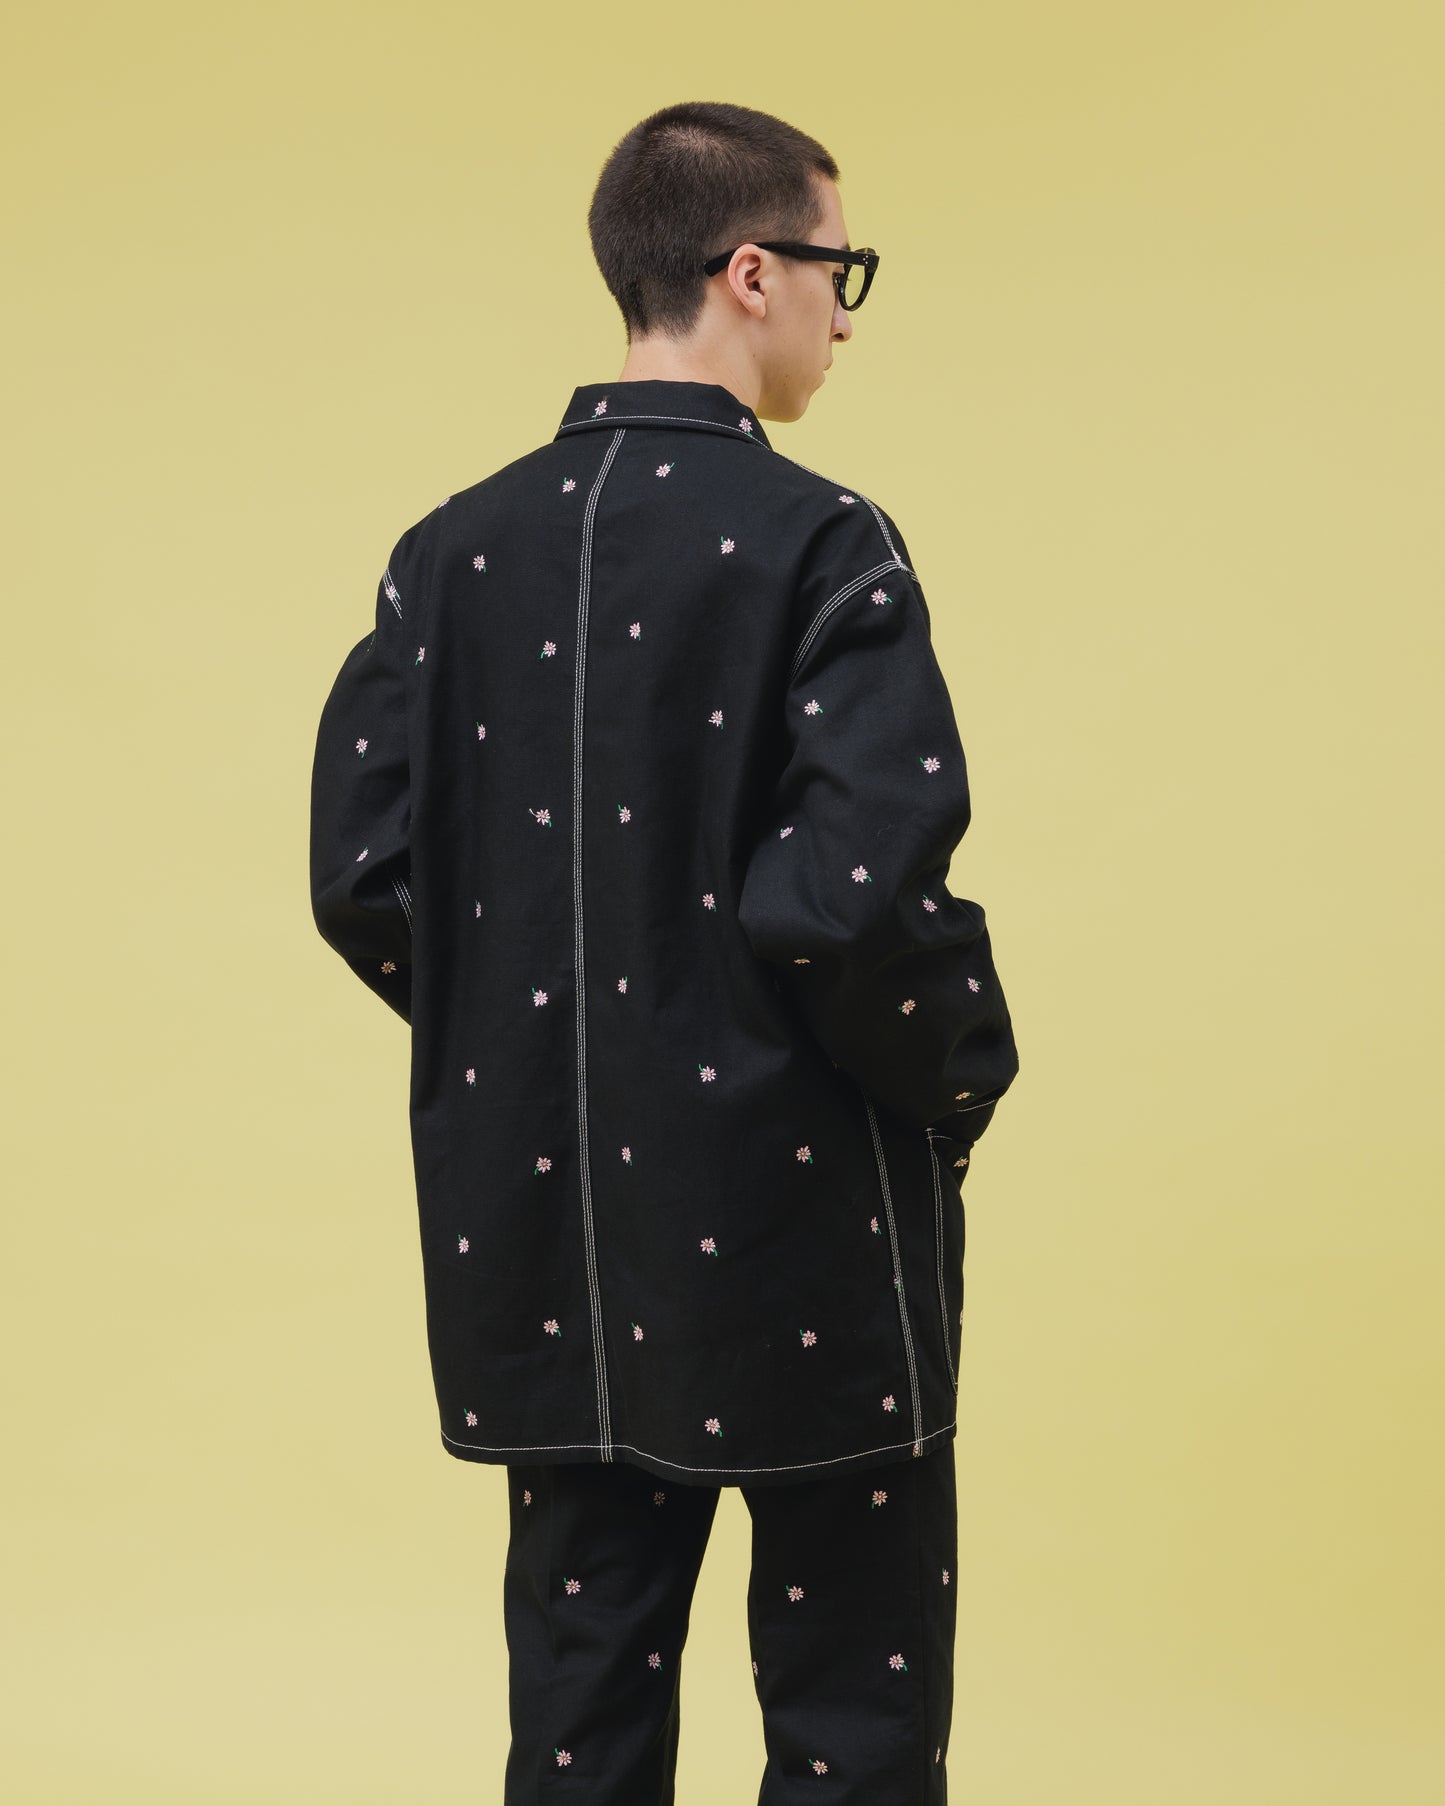 NON TOKYO / FLOWER EMBROIDERY COVERALL feat.UNIVERSALOVERALL (BLACK) / 〈ノントーキョー〉フラワー刺繍カバーオール (ブラック)